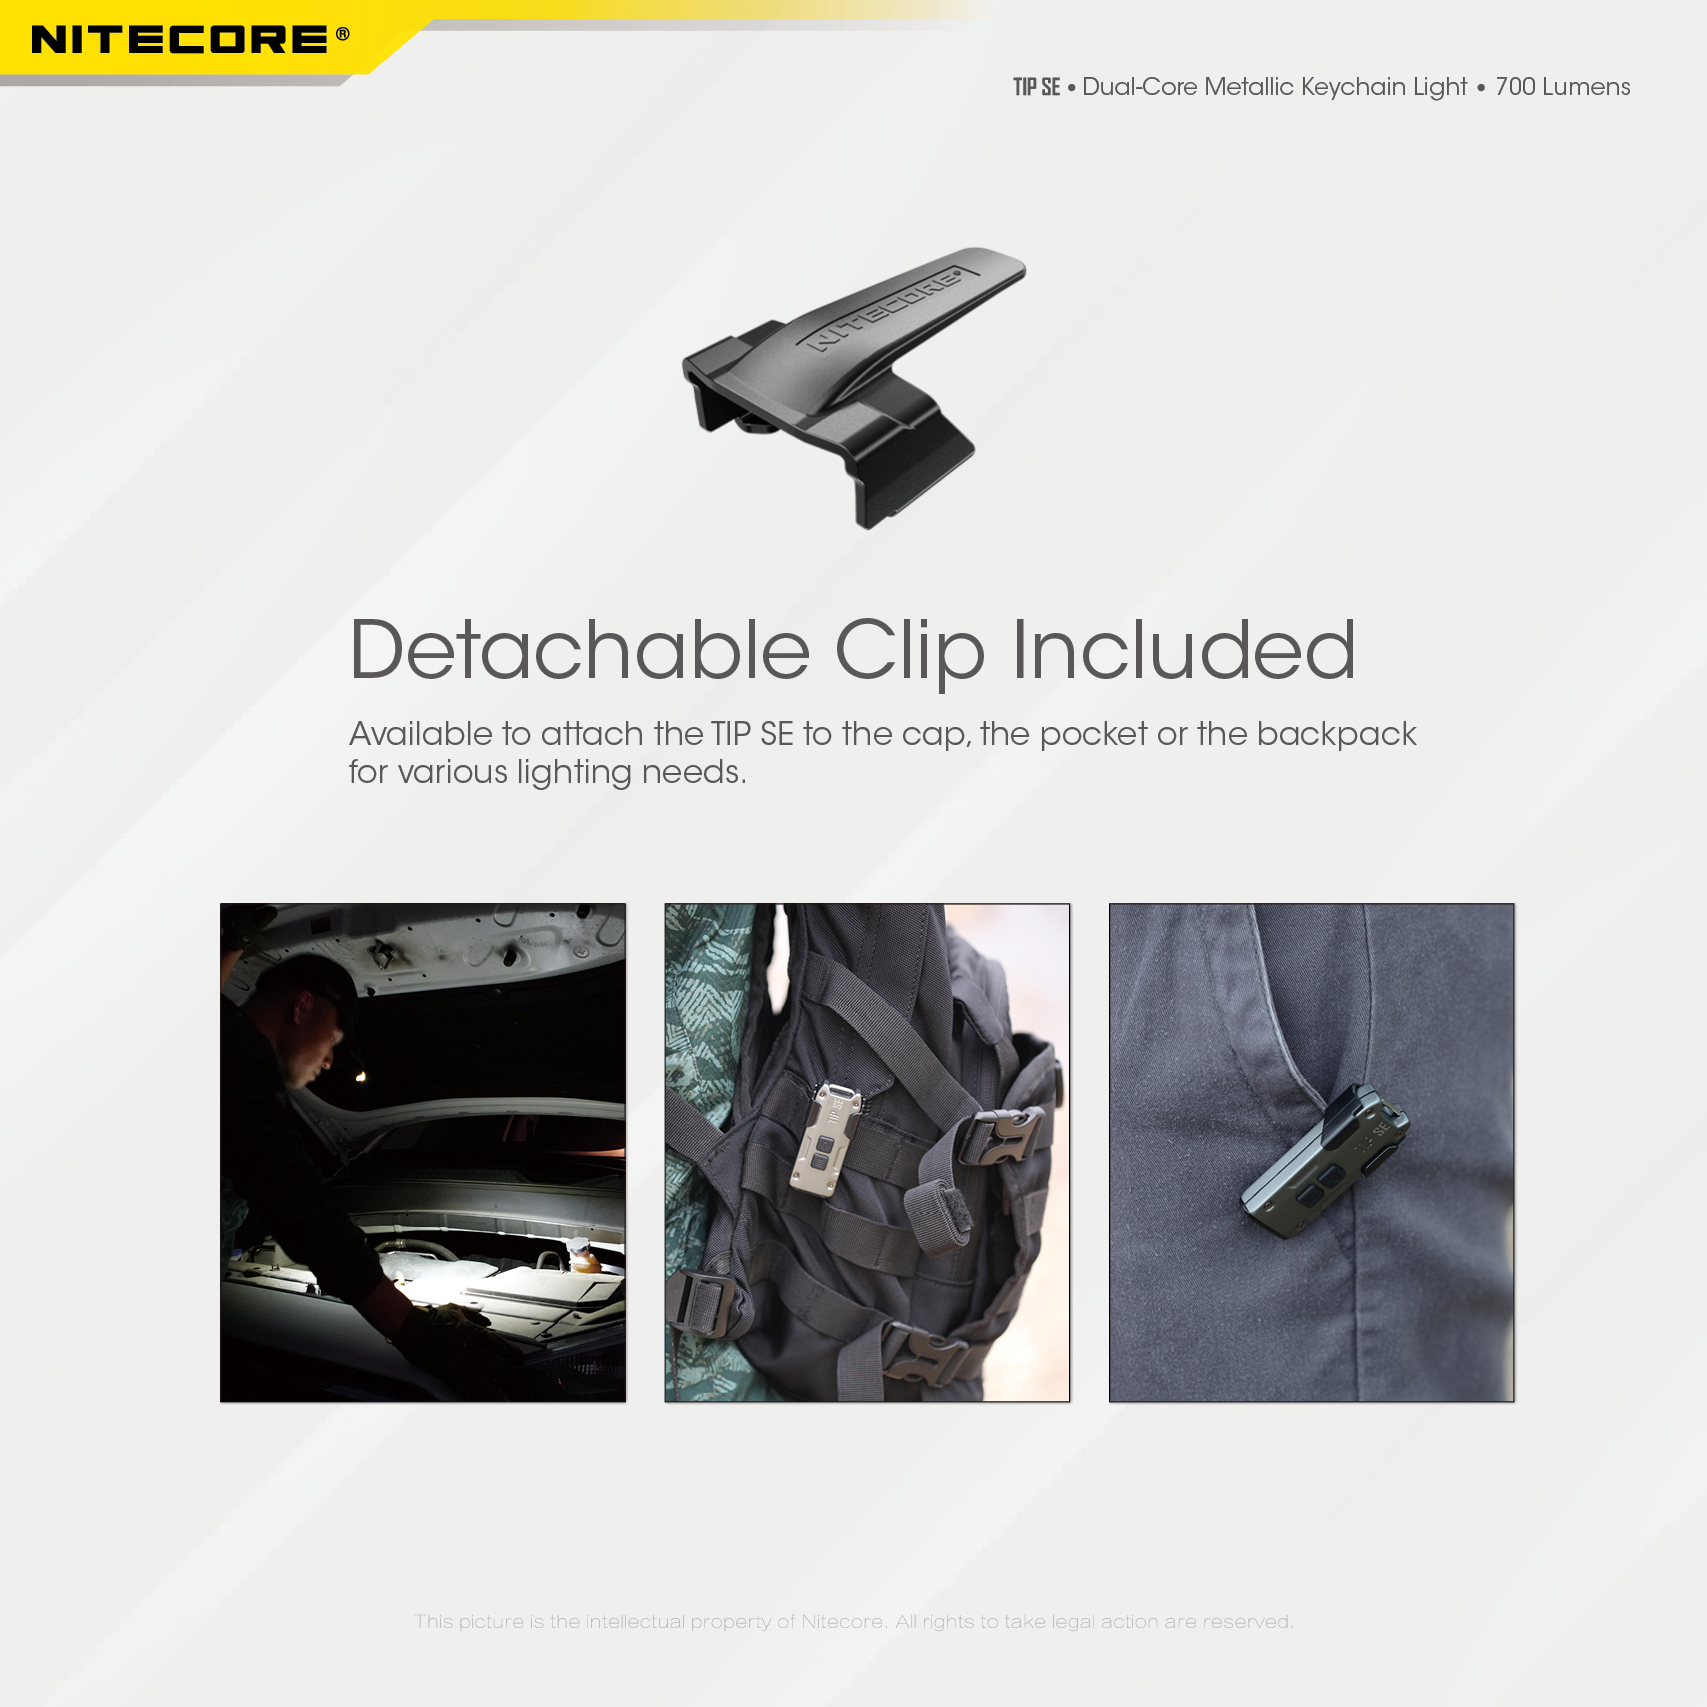 NITECORE-TIP-SE-700LM-P8-Dual-Light-LED-Keychain-Flashlight-Type-C-Rechargeable-QC-Every-Day-Carry-M-1976045-16